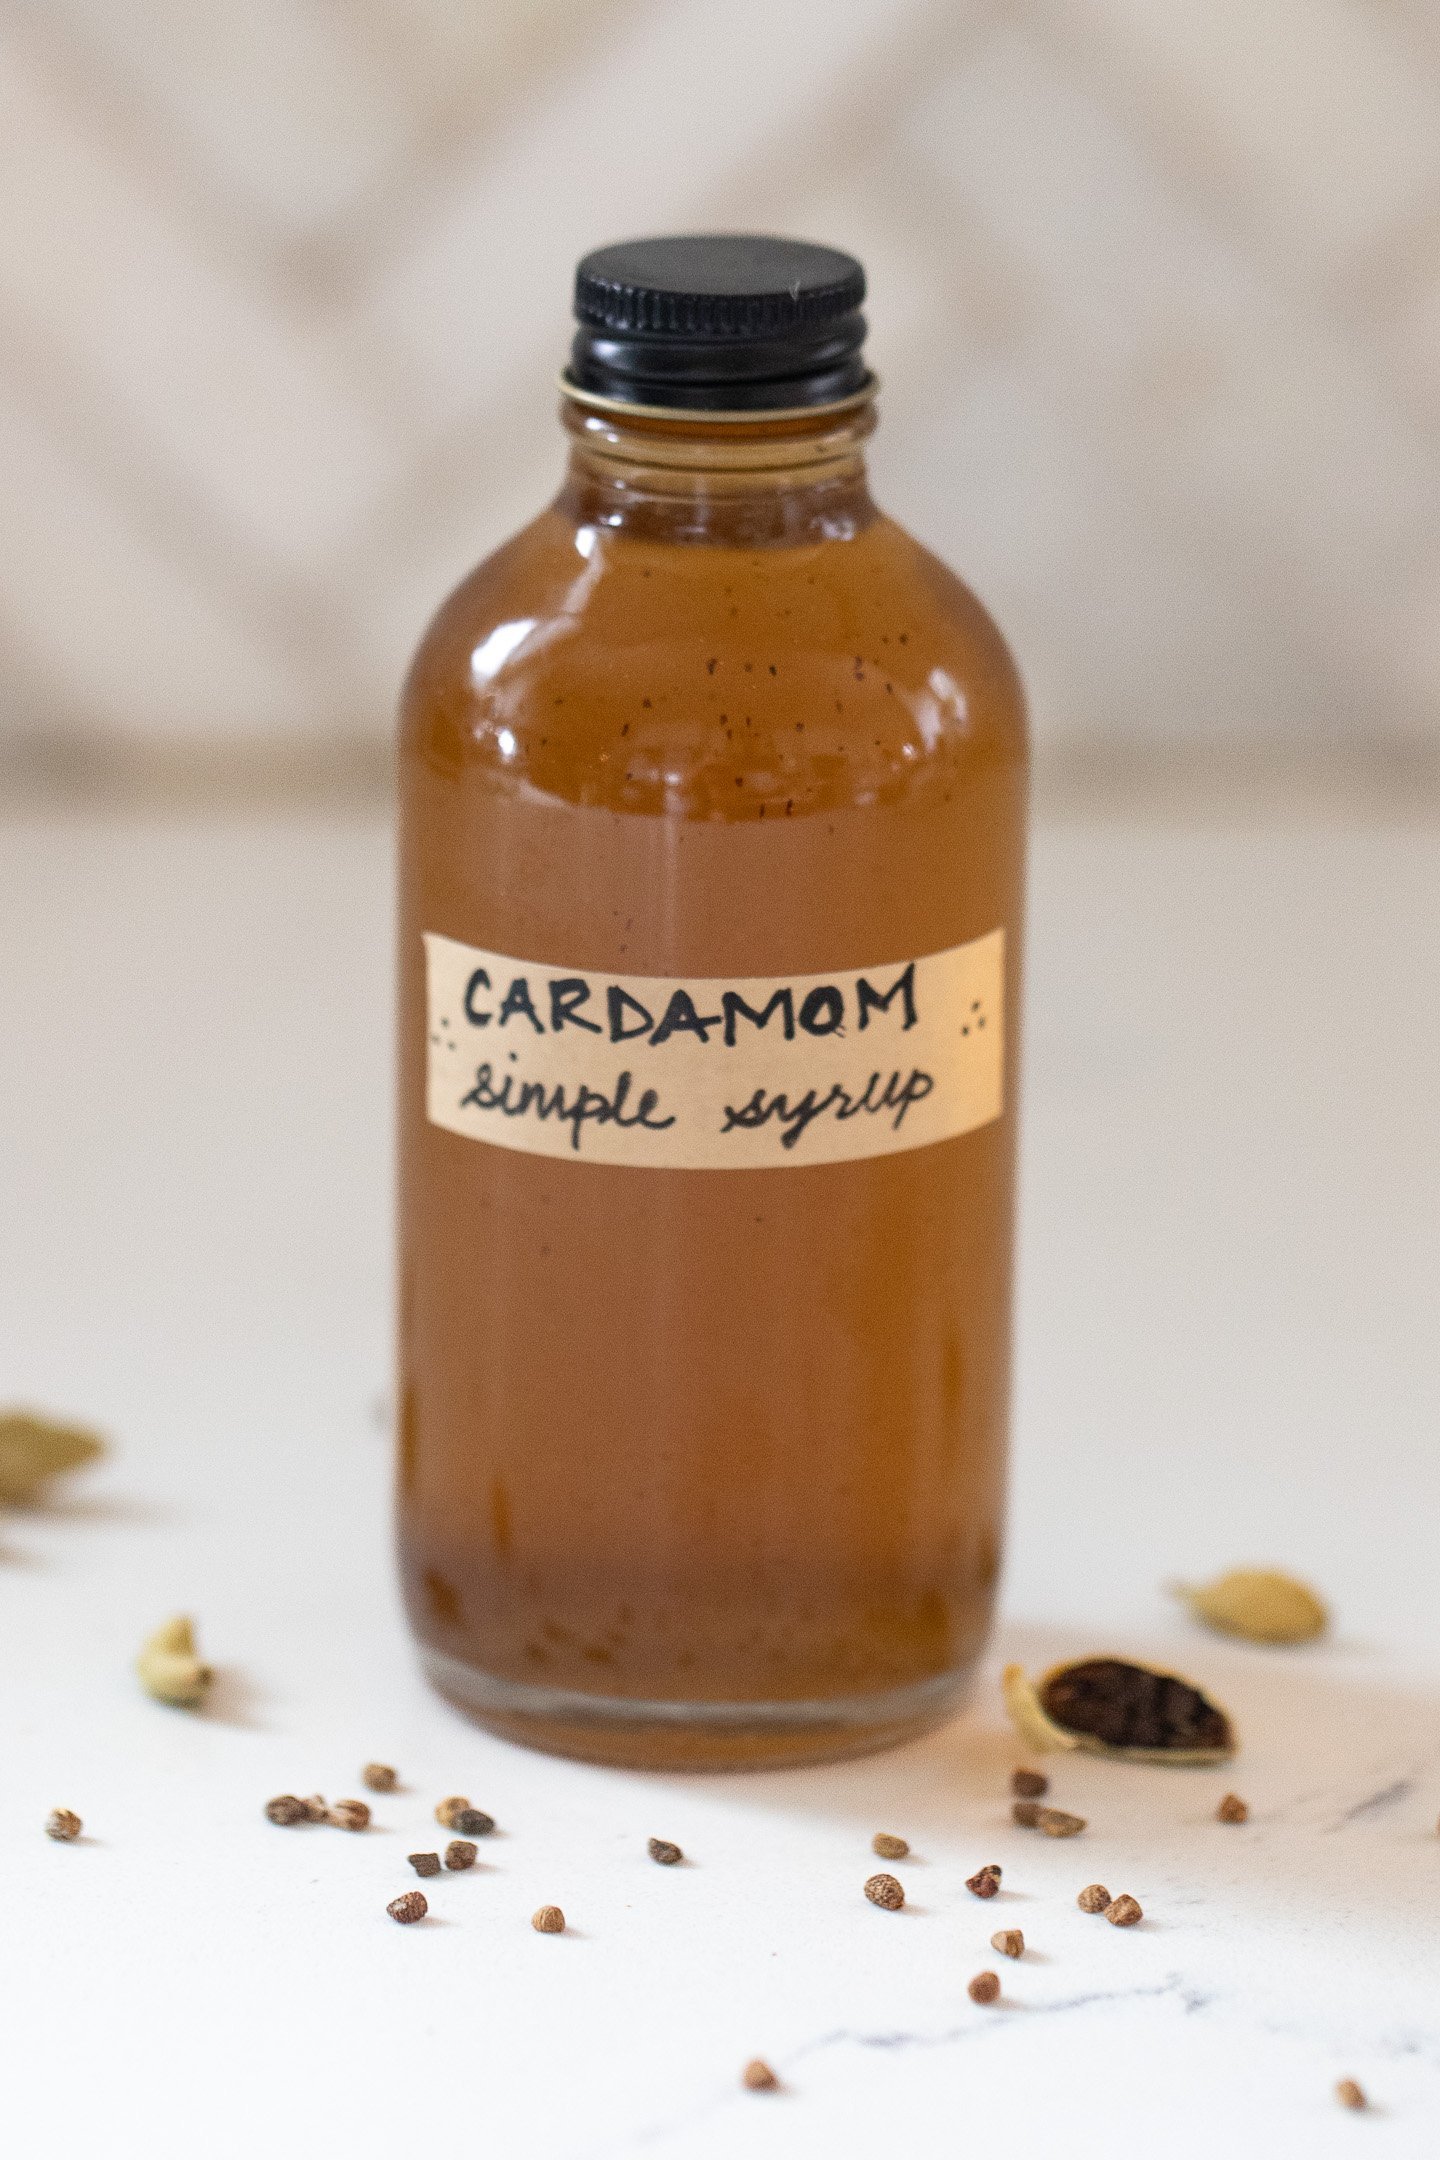 Bottle of Cardamom simple syrup